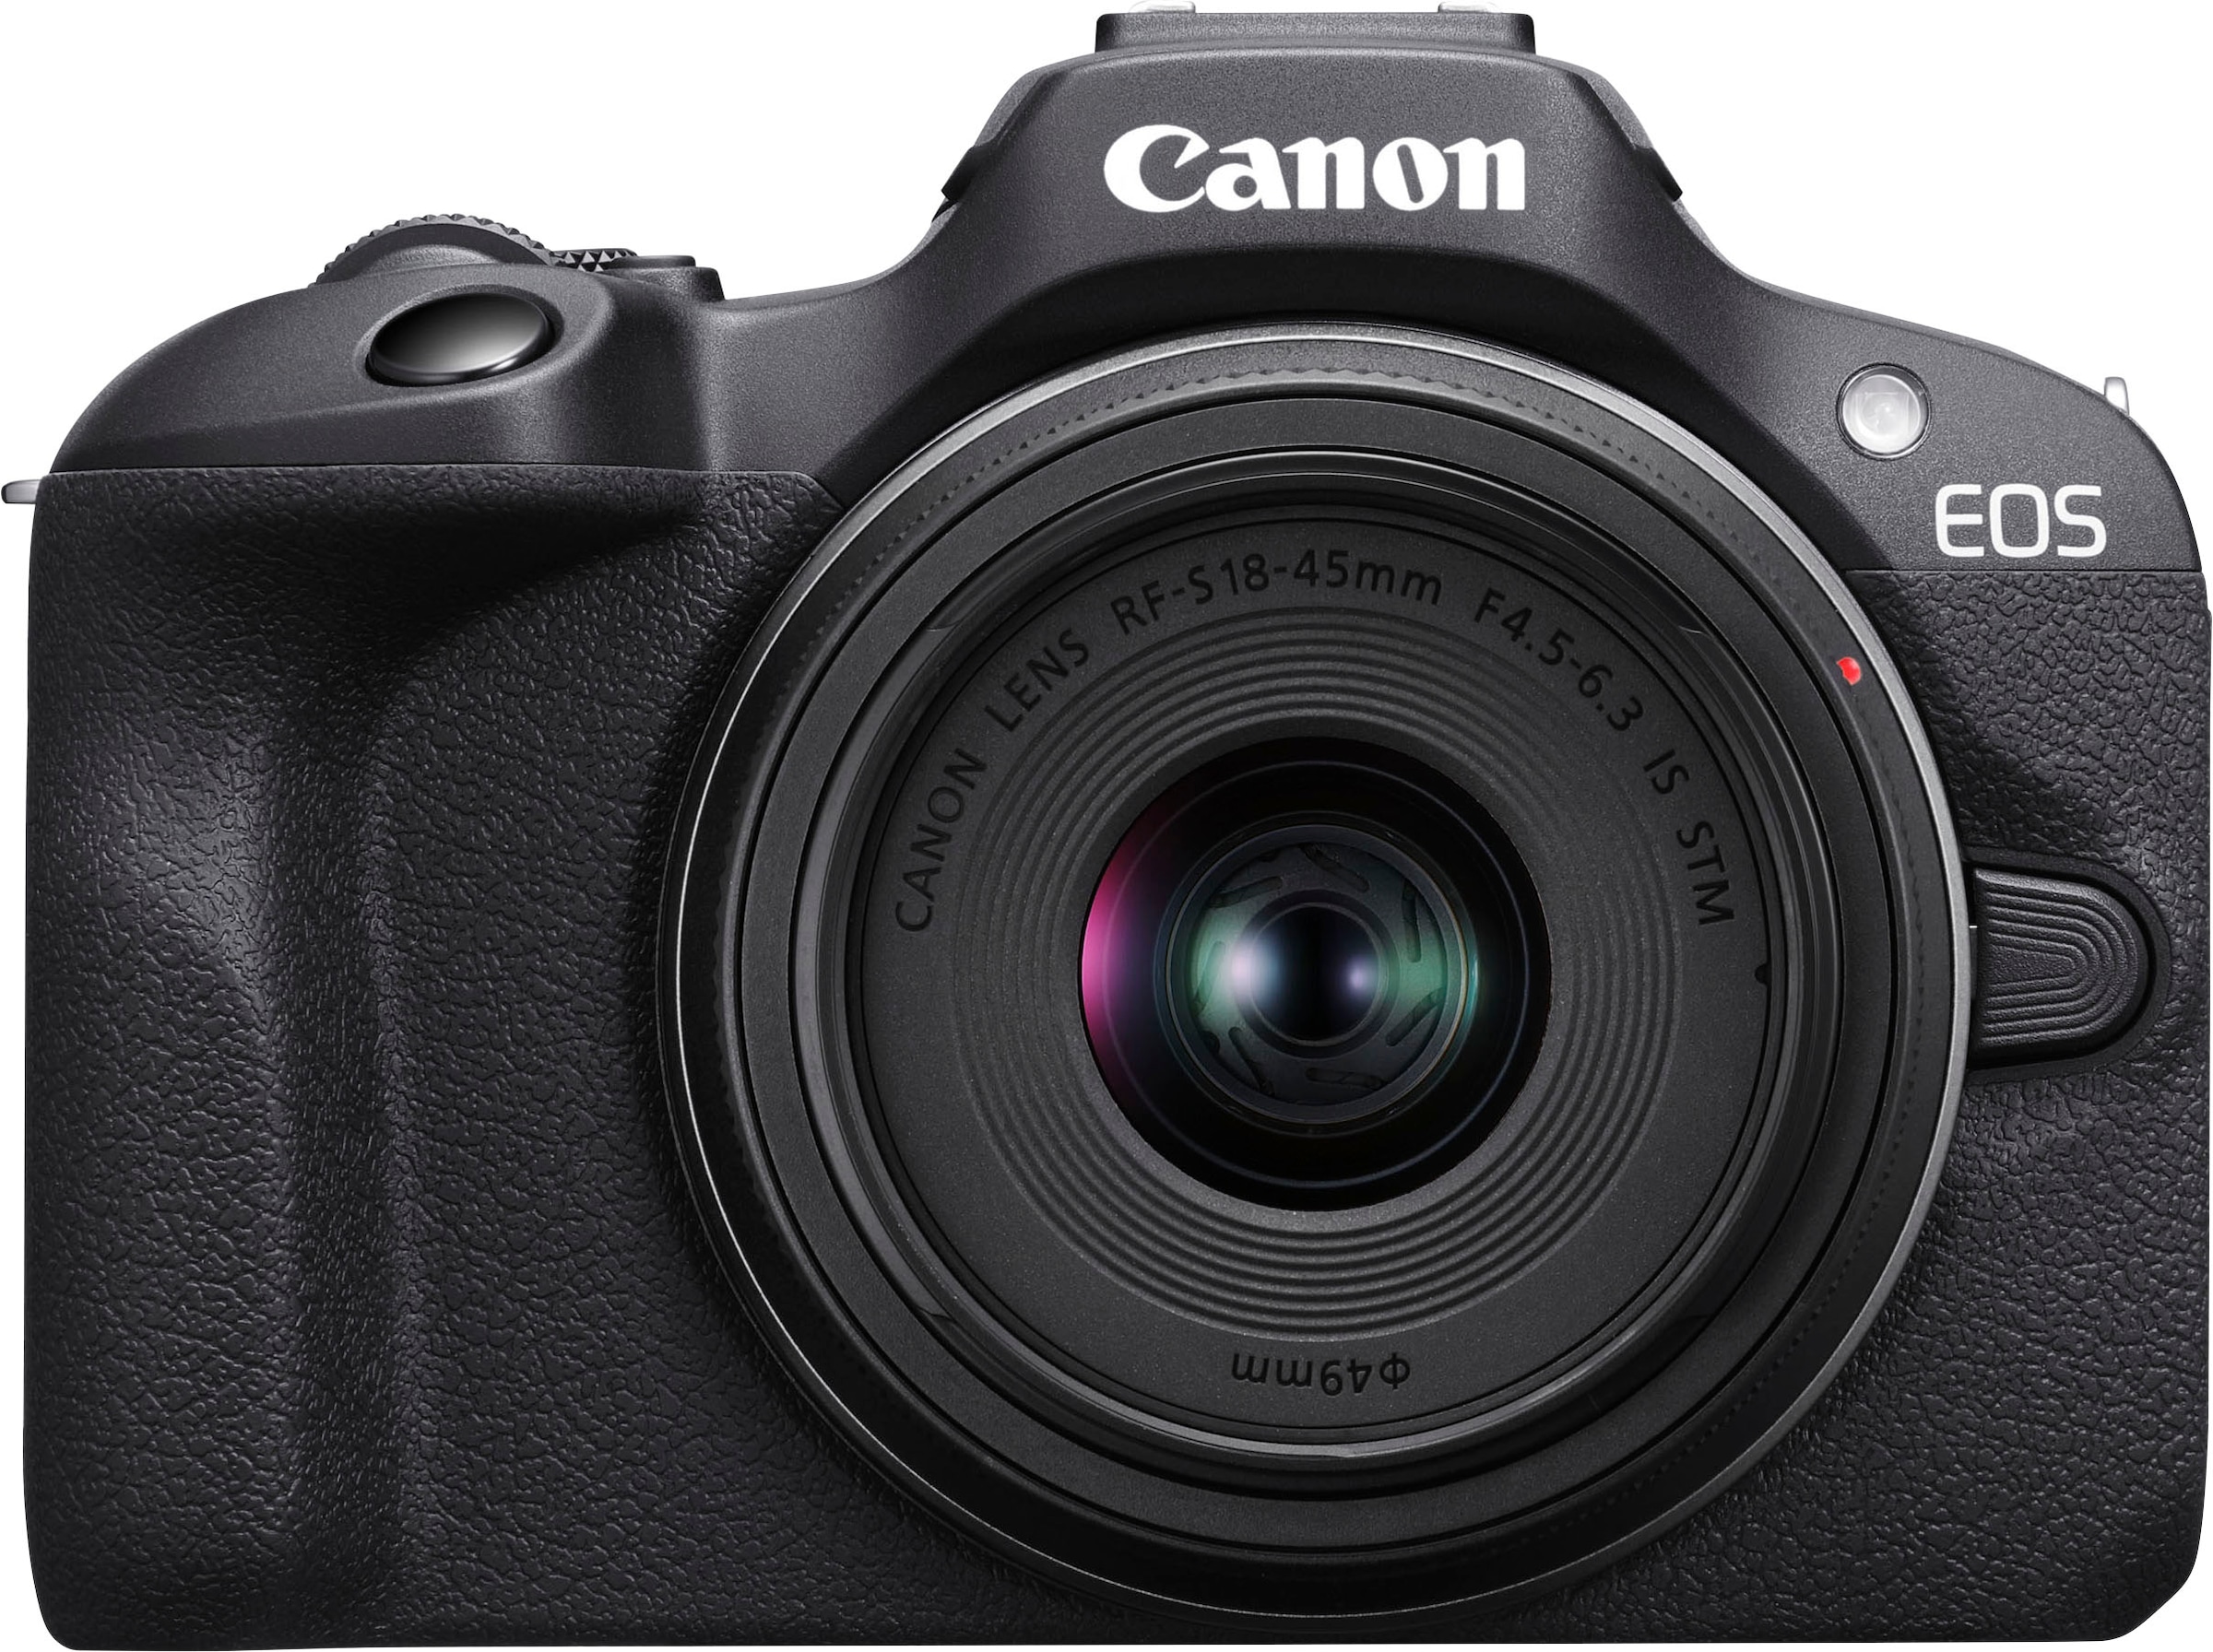 Canon Systemkamera 24,1 bei STM + STM, R100 MP, »EOS 18-45mm F4.5-6.3 Bluetooth-WLAN RF-S Kit«, F4.5-6.3 IS RF-S IS 18-45mm